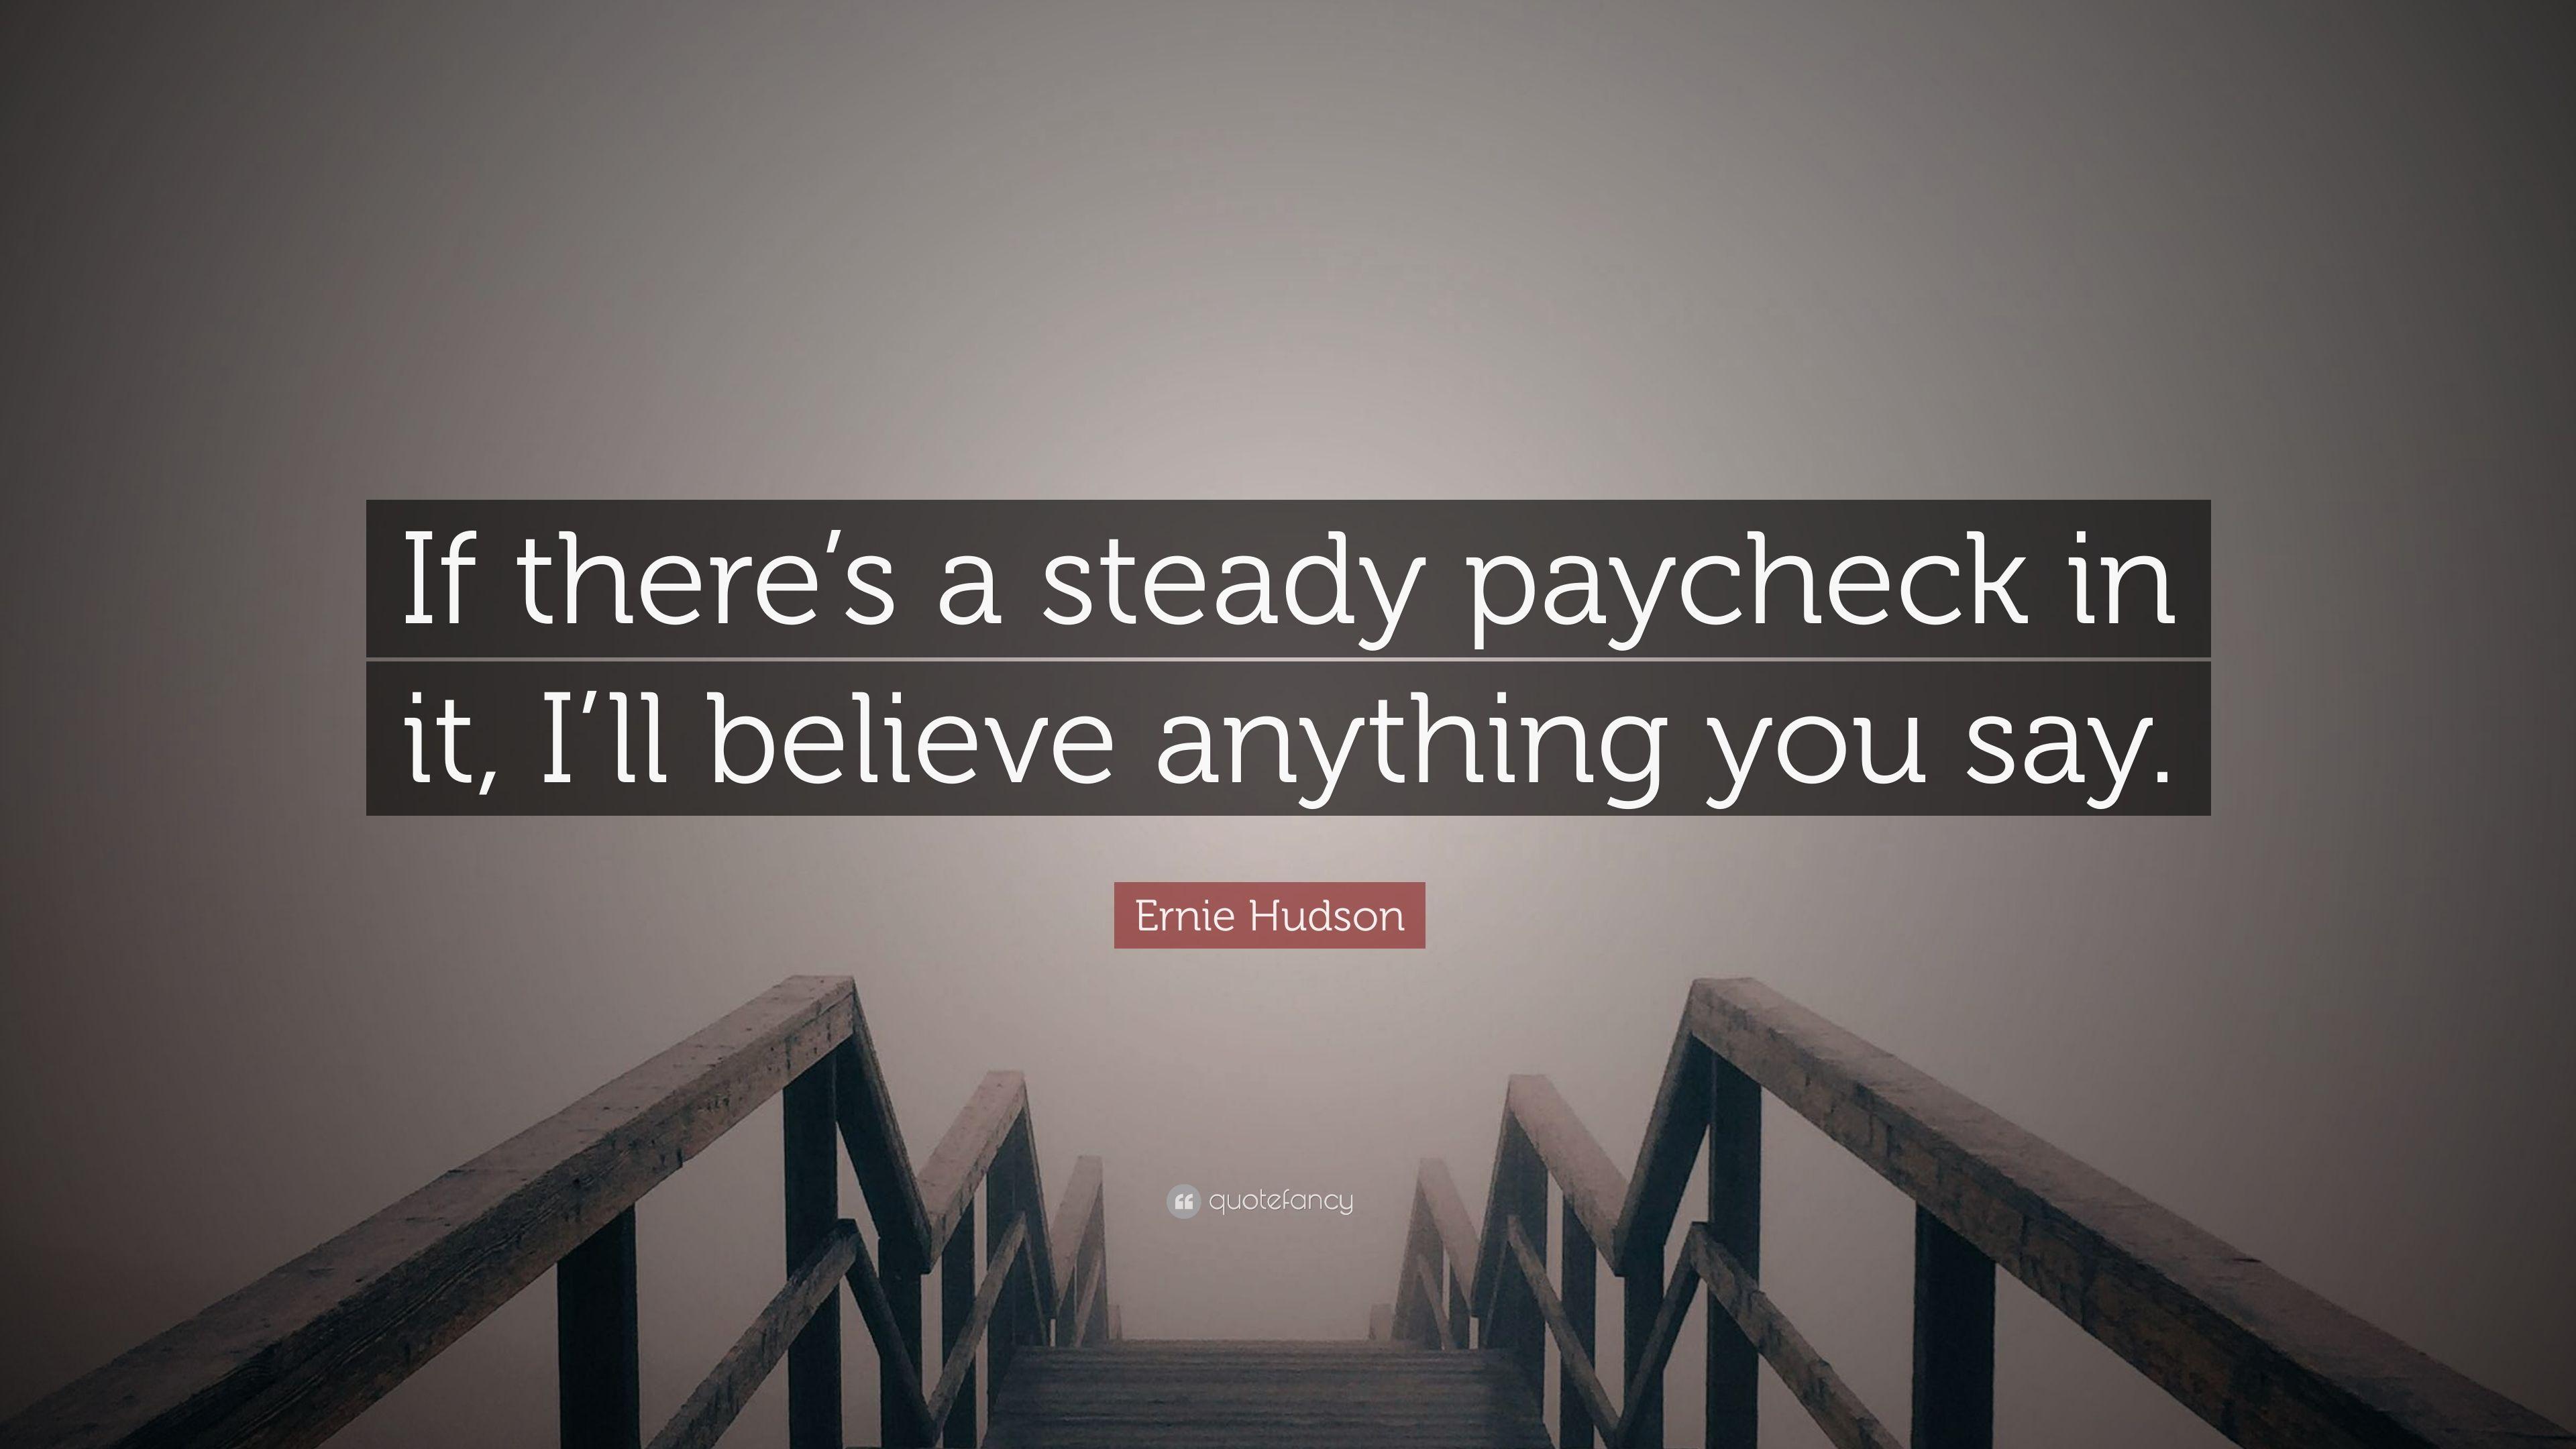 Ernie Hudson Quote: “If there's a steady paycheck in it, I'll